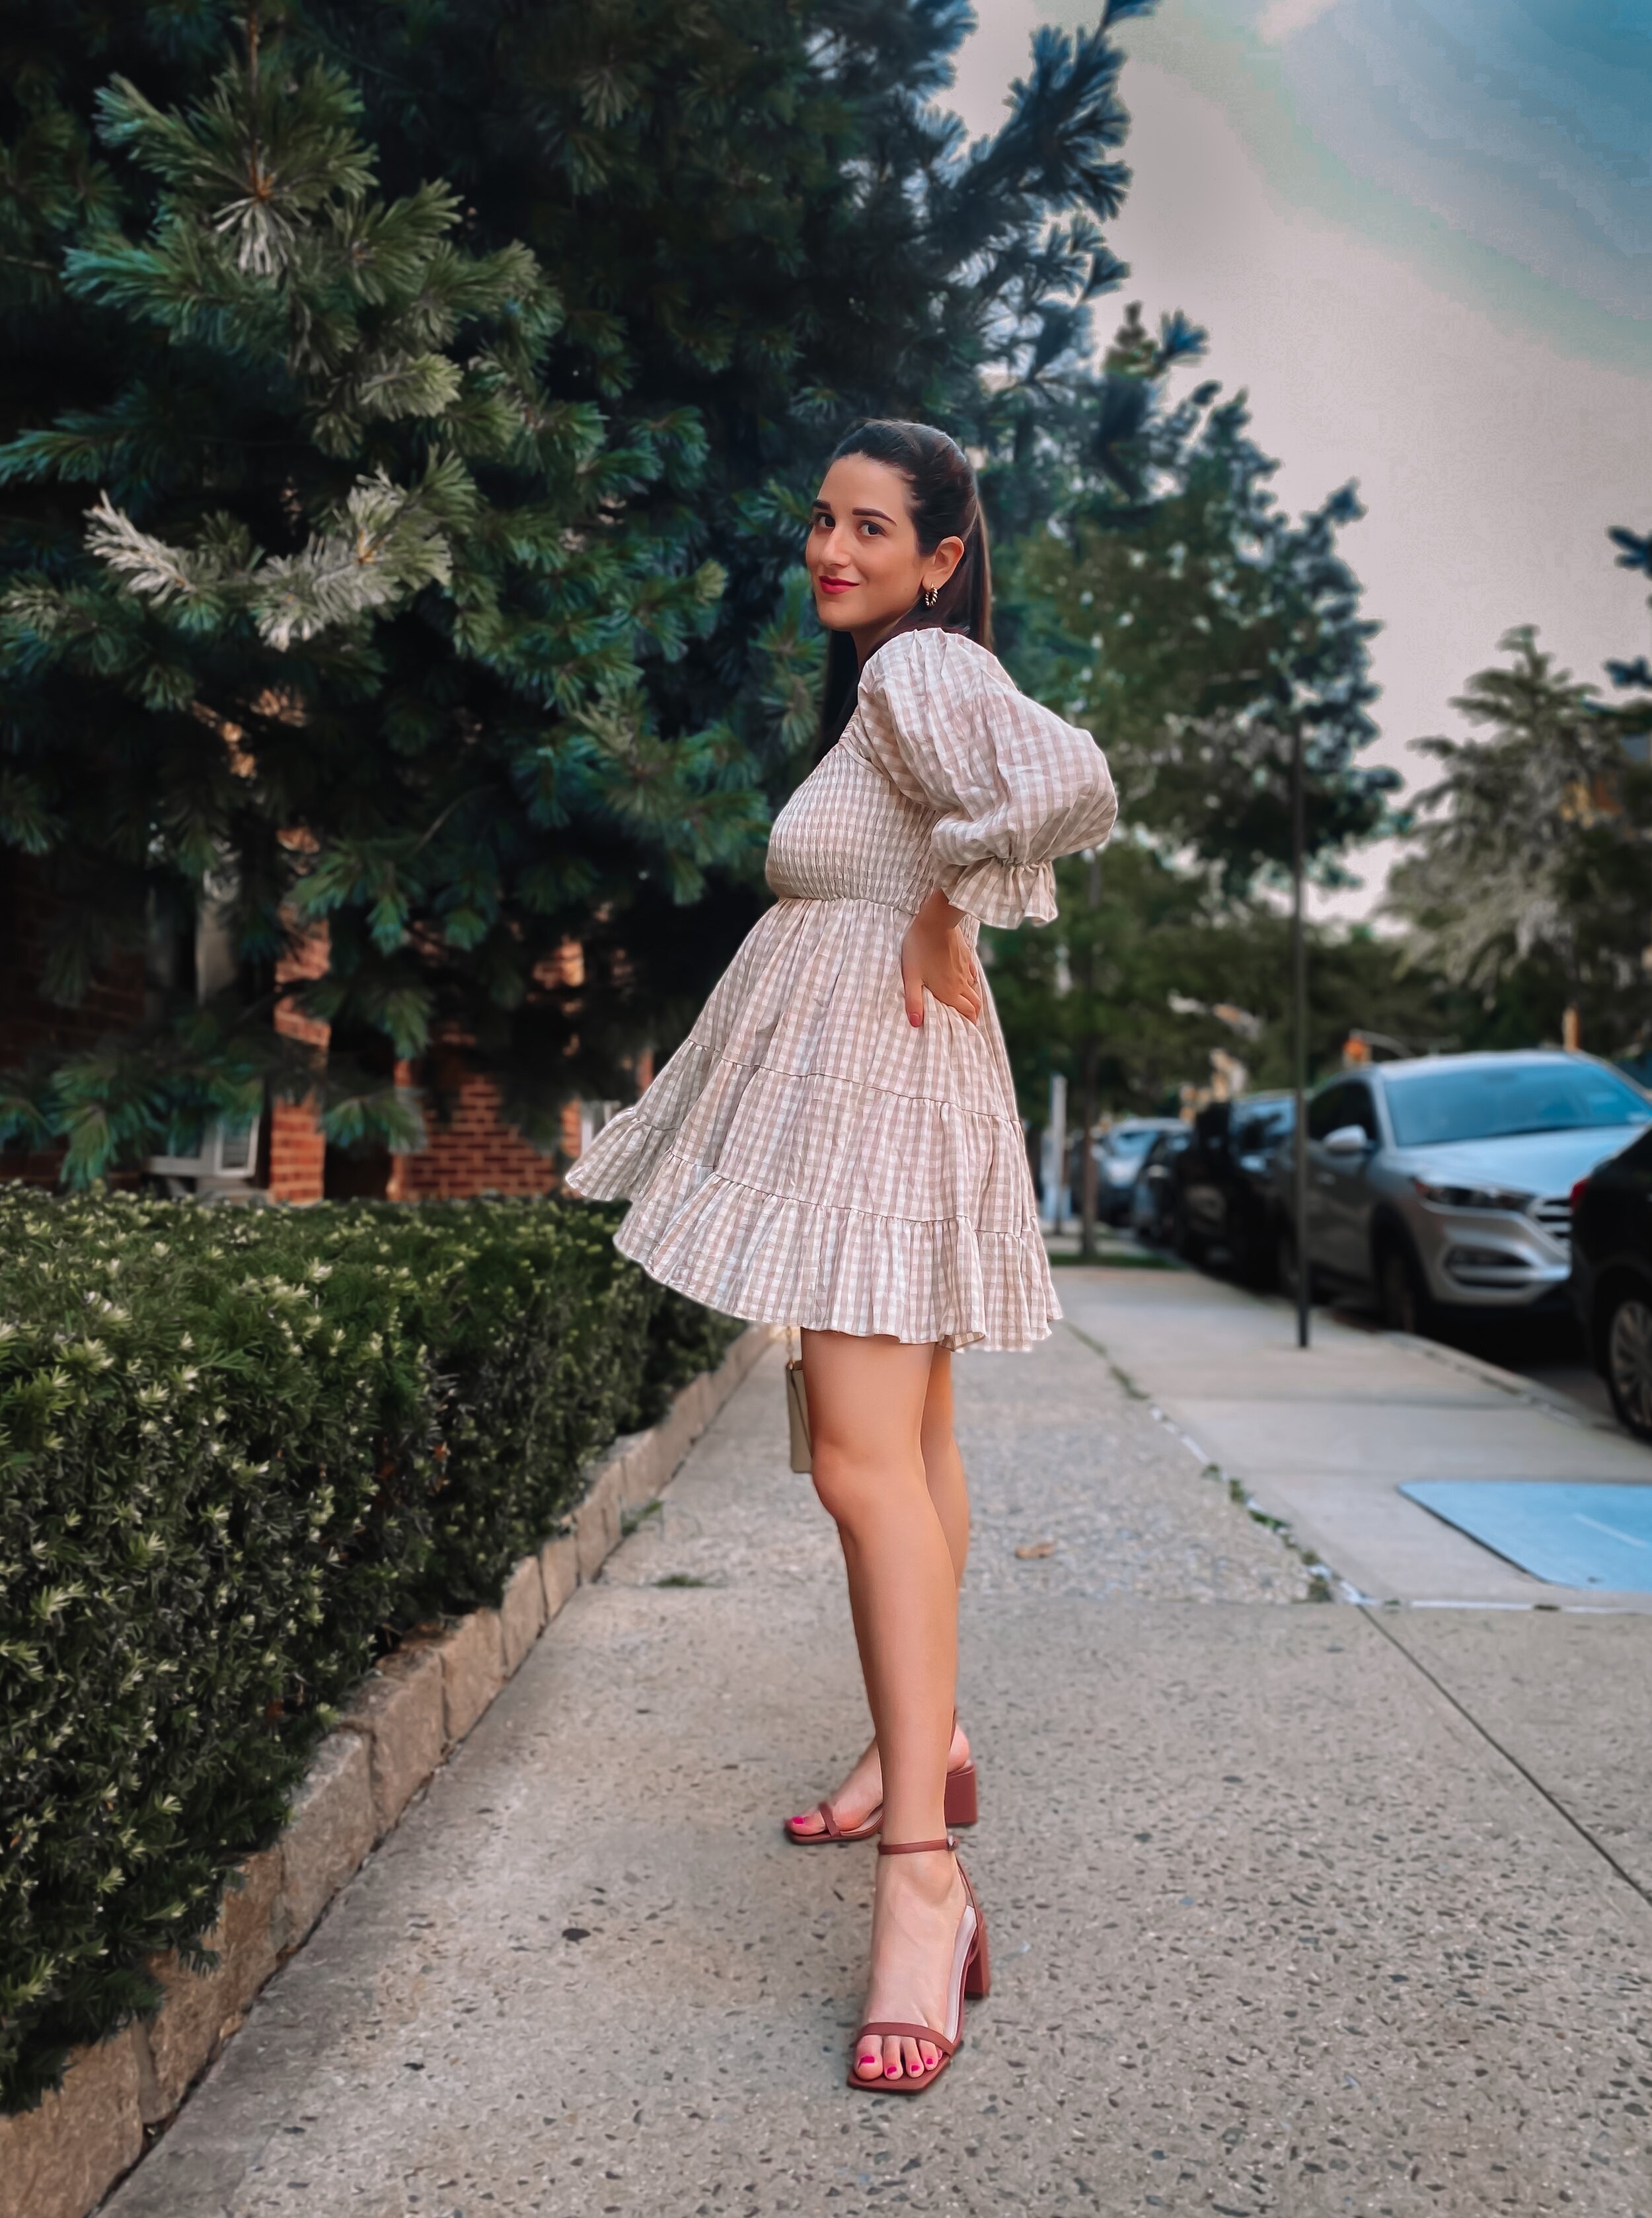 Gingham Puff Sleeve Dress + Tan Sandals Esther Santer NYC Street Style Fashion Blogger Cute Look Shopping Olive & Paix Mini Ruffle Dress Charles & Keith Shoes Gold Hoop Earrings Half Ponytail Girl Women Red Lipstick New York City 2021 Bag What To Wear.jpg